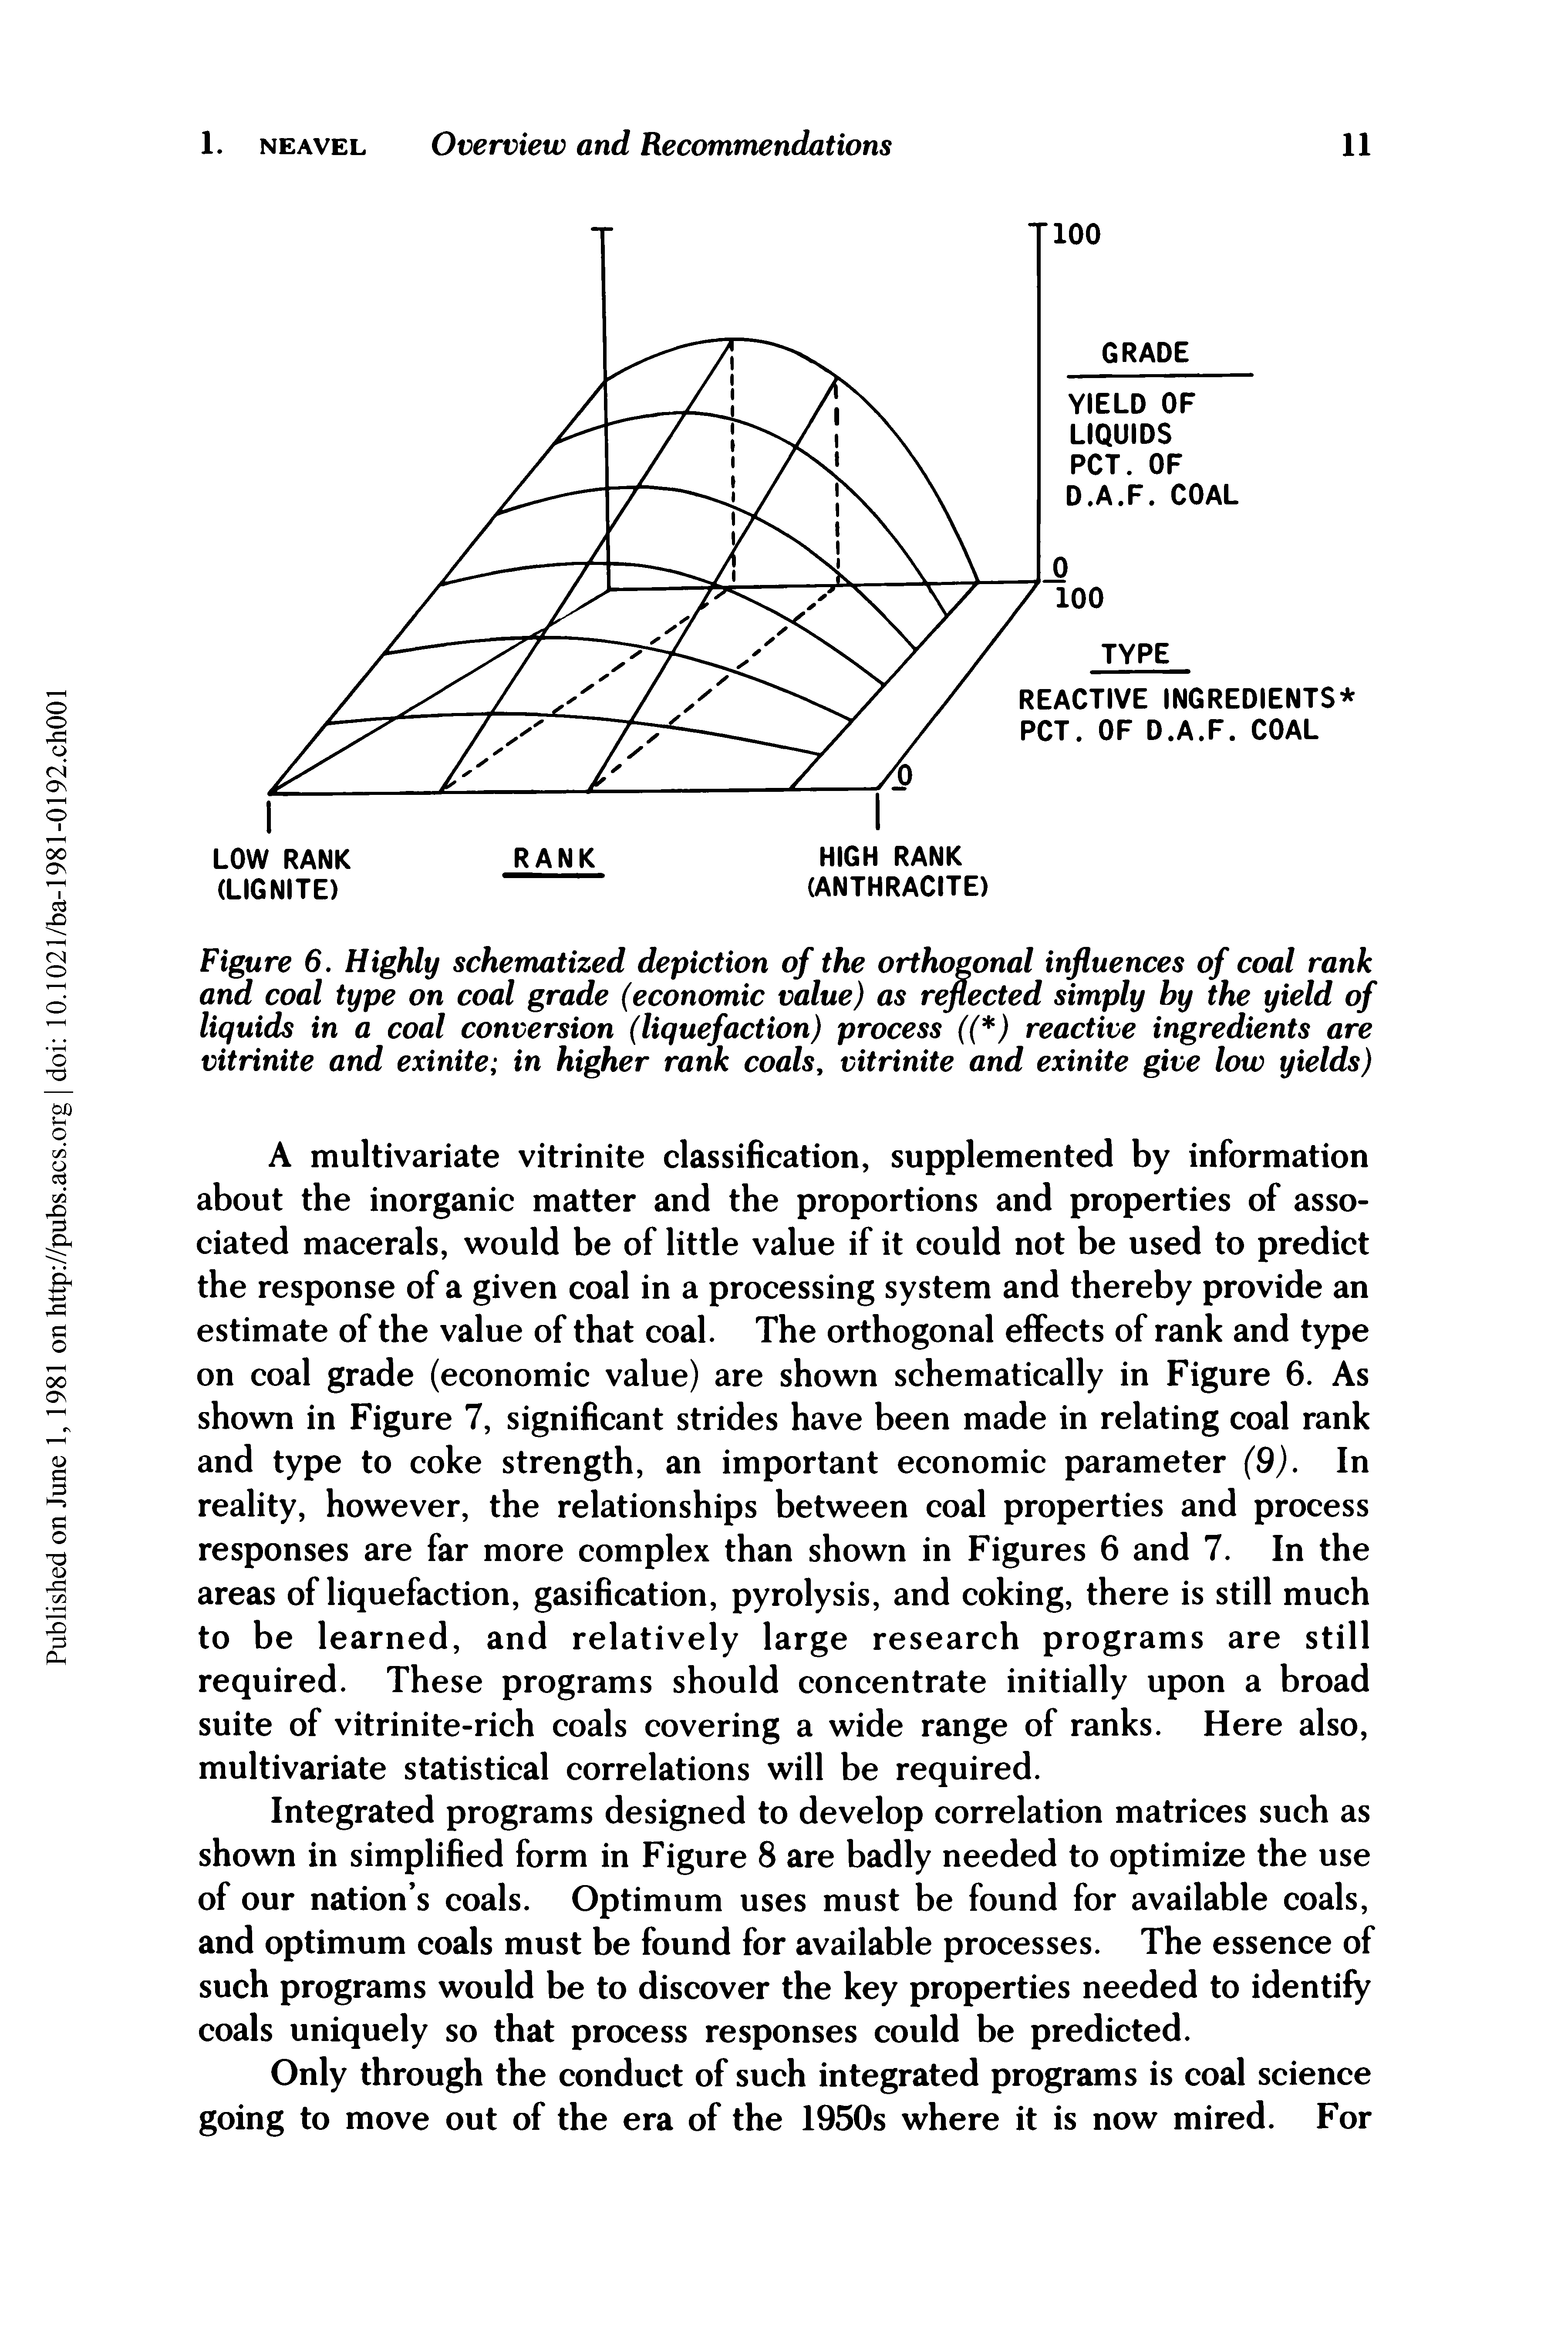 Figure 6. Highly schematized depiction of the orthogonal influences of coal rank and coal type on coal grade (economic value) as reflected simply by the yield of liquids in a coal conversion (liquefaction) process (( ) reactive ingredients are vitrinite and exinite in higher rank coals, vitrinite and exinite give low yields)...